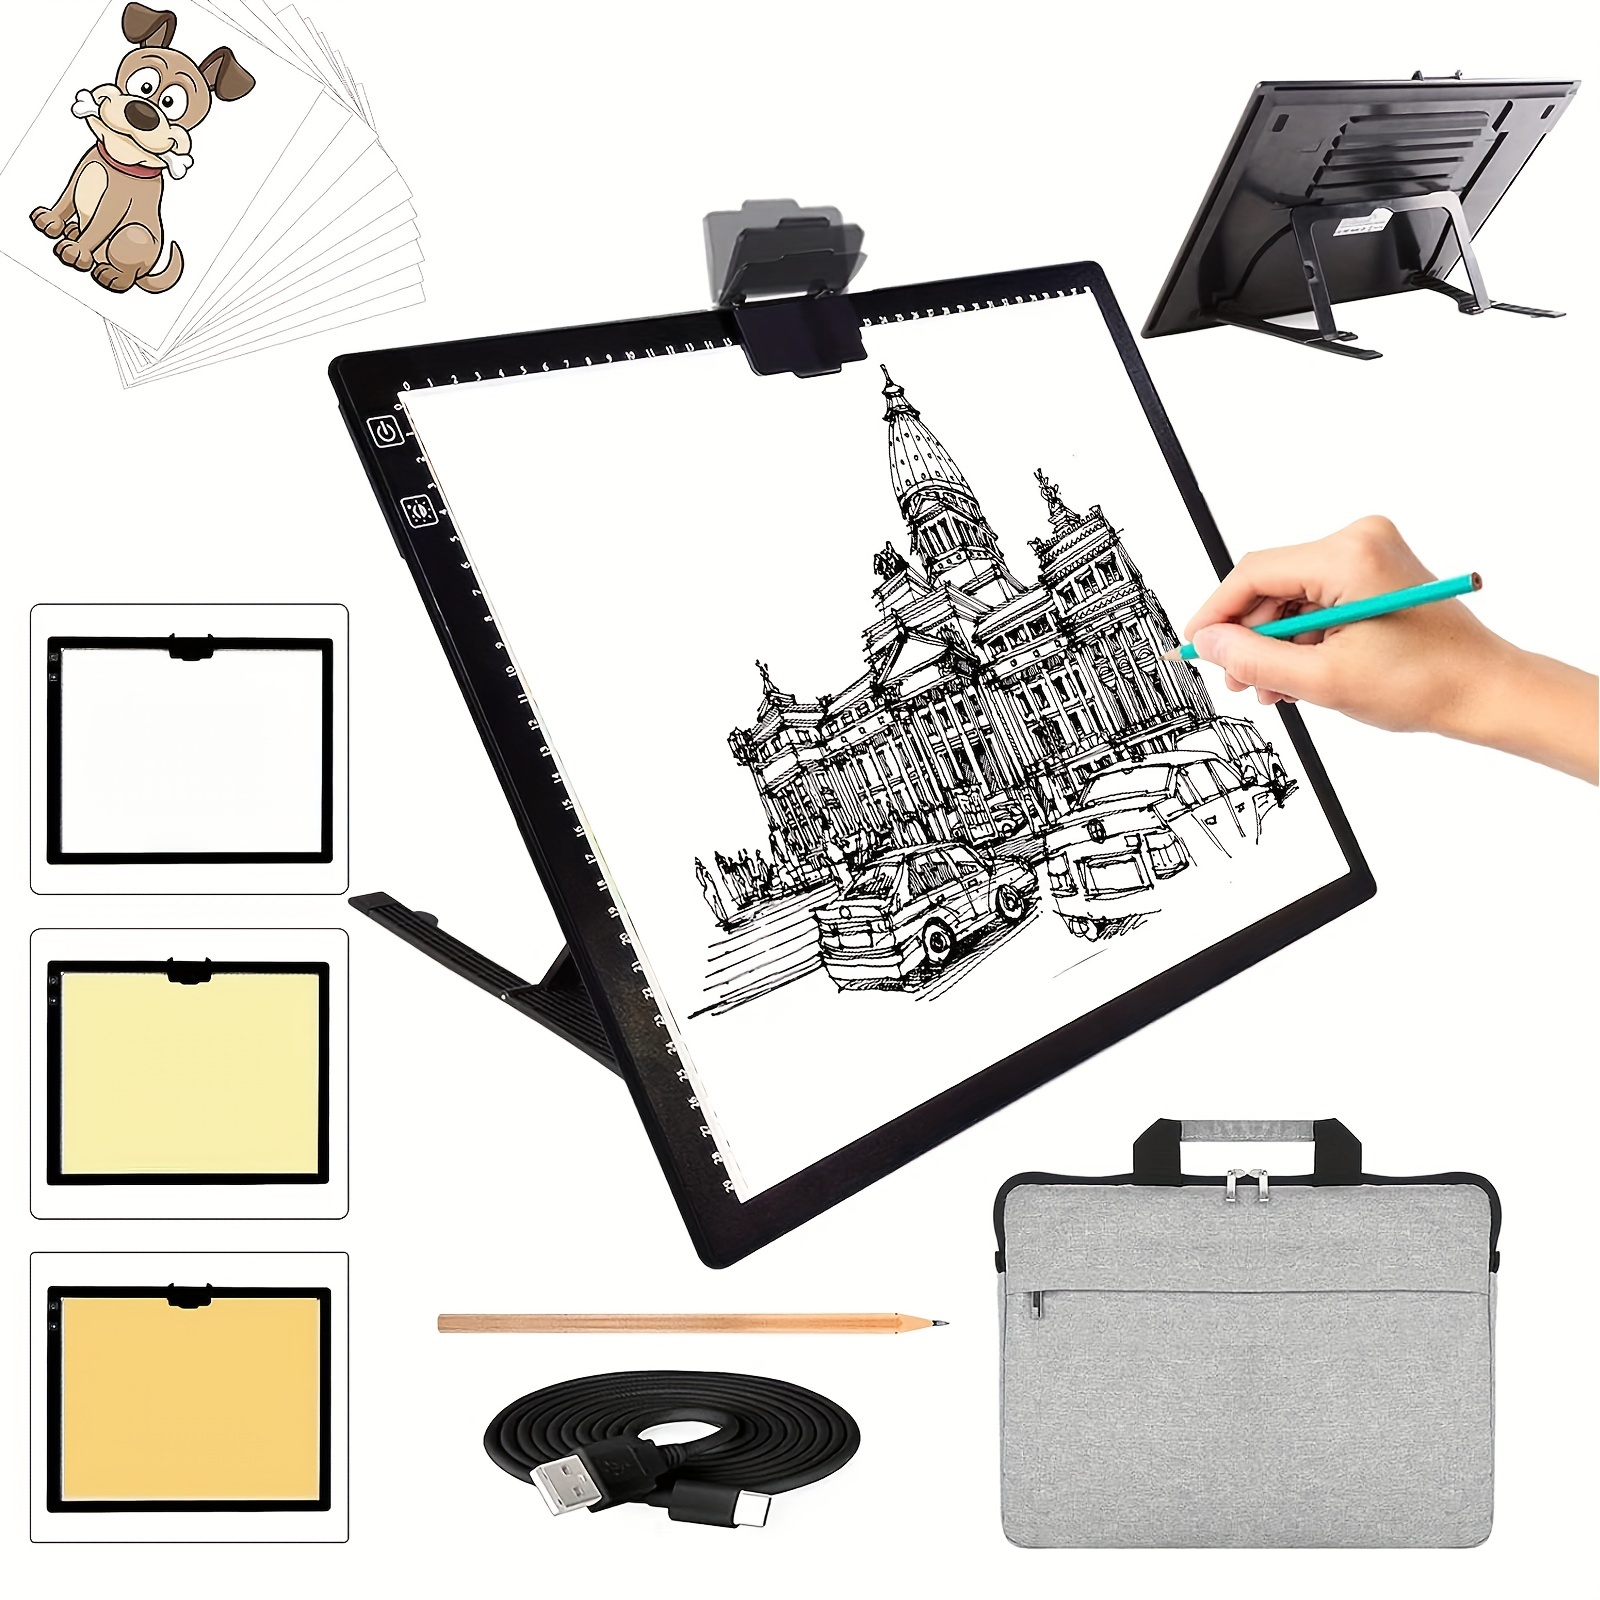  A3 LED Light Board, A3 Tracing Light Box, Magnetic Light Pad,  Light Table for Tracing, LED Copy Board, Sketch Pad with Dimmable  Brightness, Magnetic and Storage Bag.